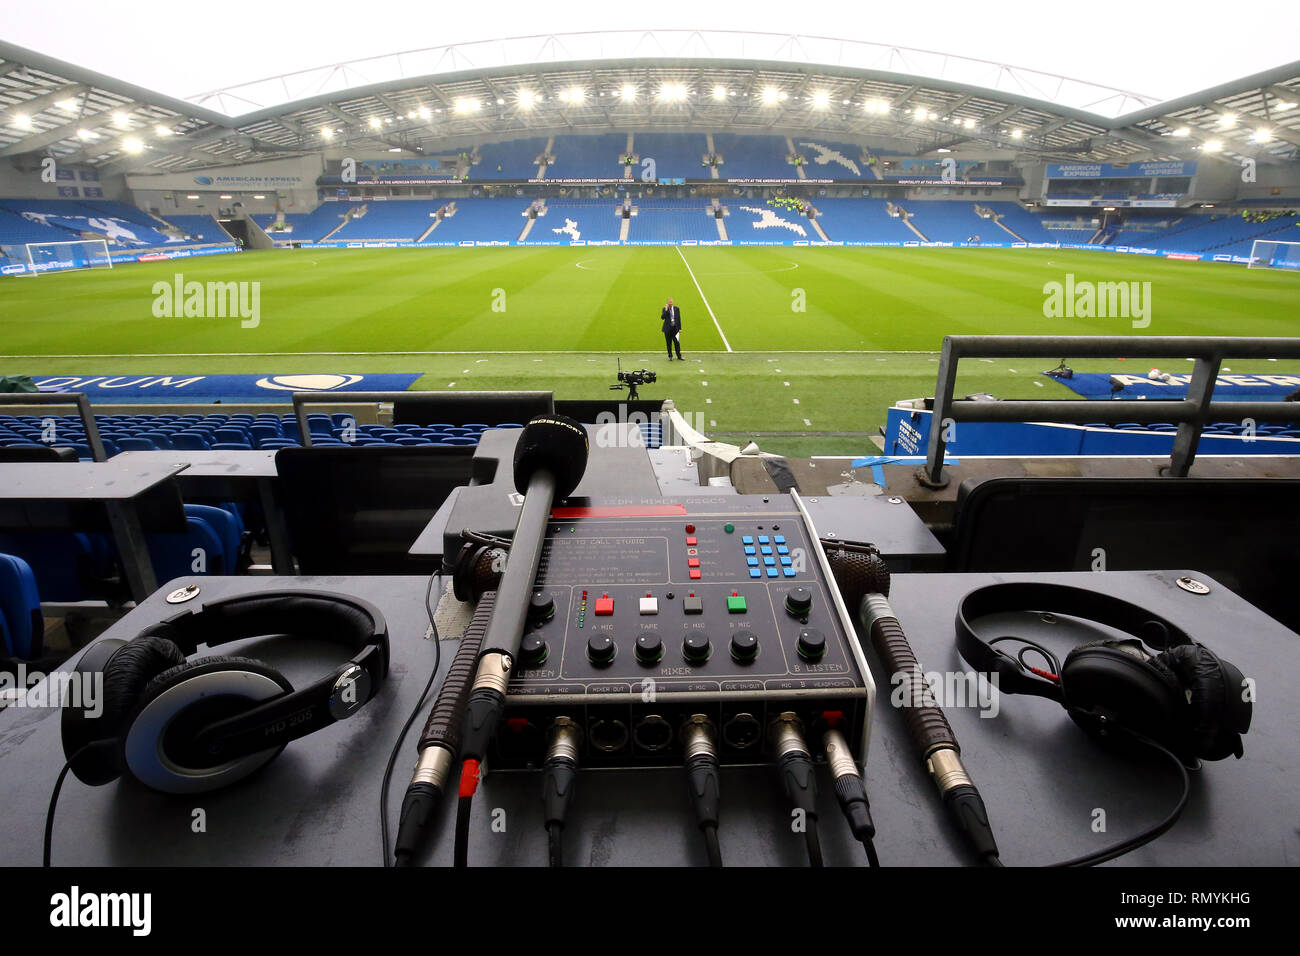 Commentary Box High Resolution Stock Photography and Images - Alamy